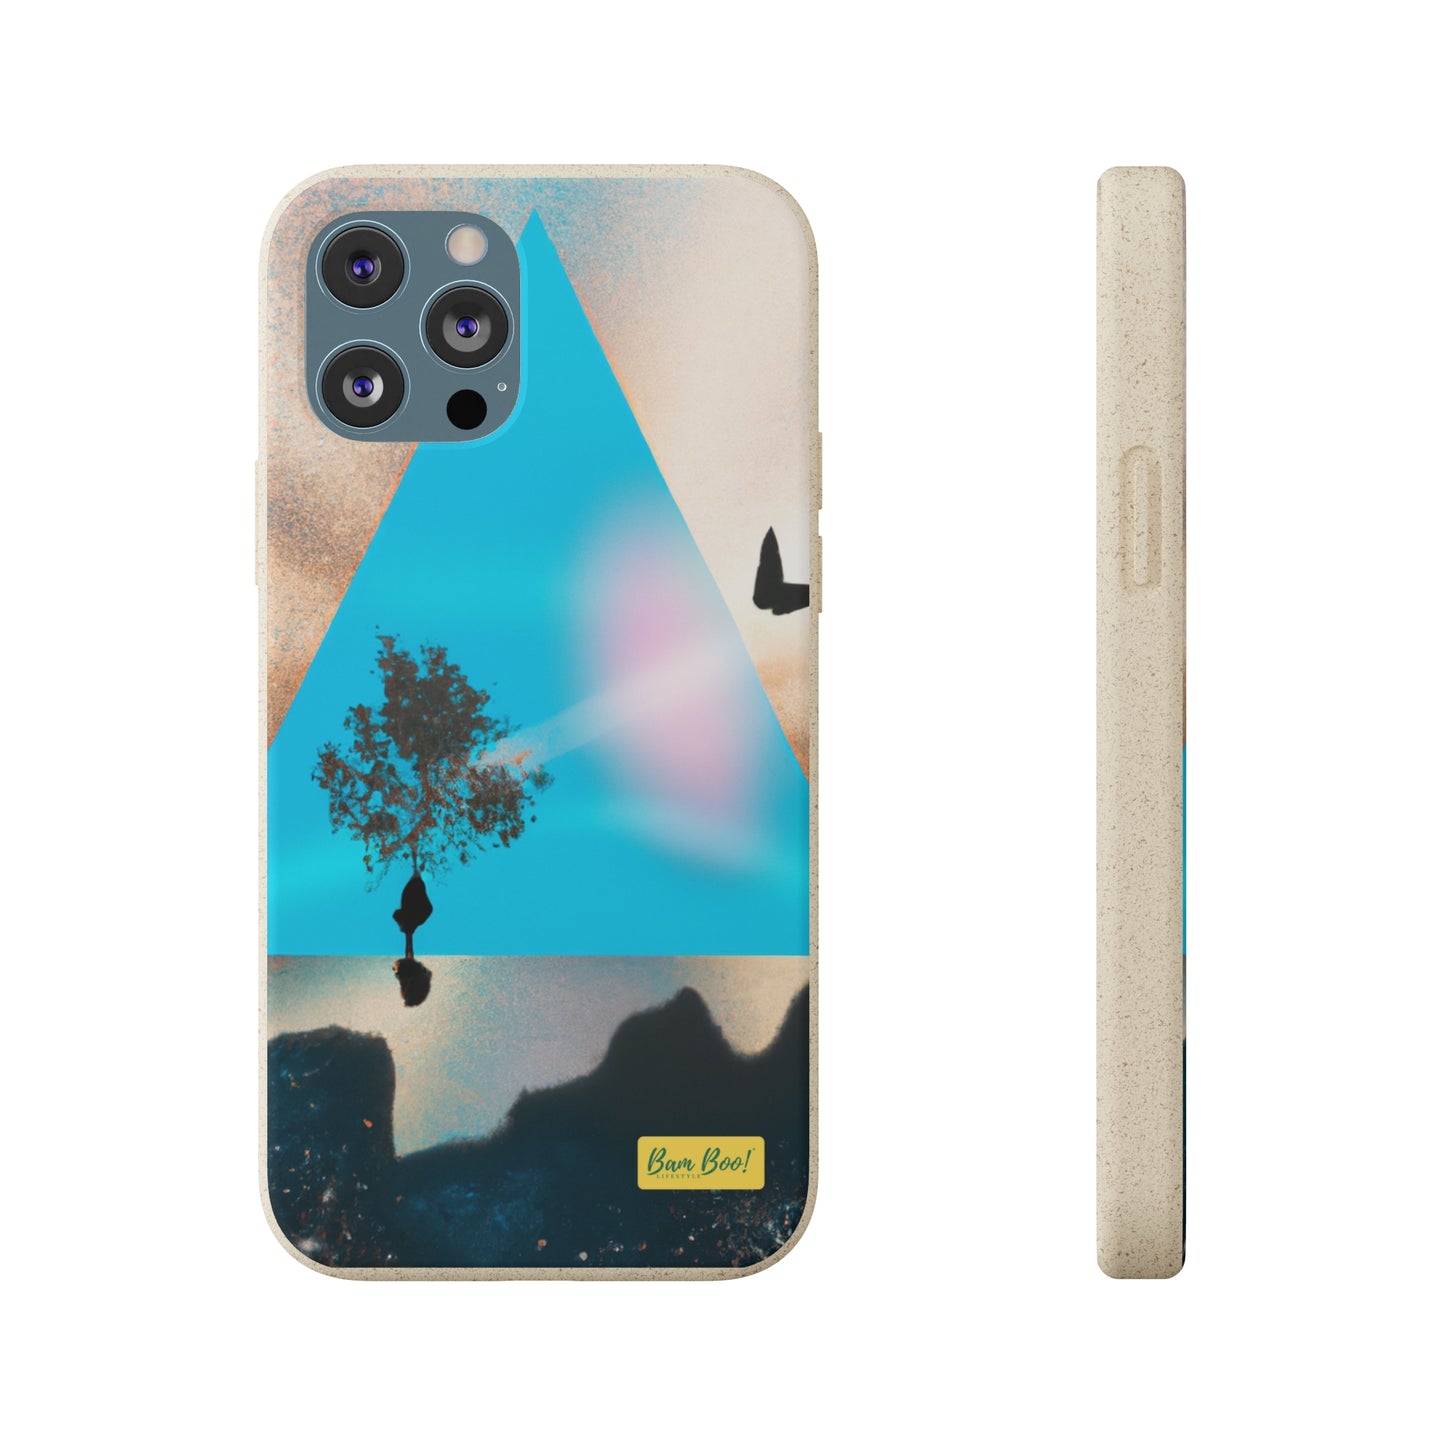 Dreamscaping a Past: Recreating Childhood Memories in Surreal Landscapes - Bam Boo! Lifestyle Eco-friendly Cases